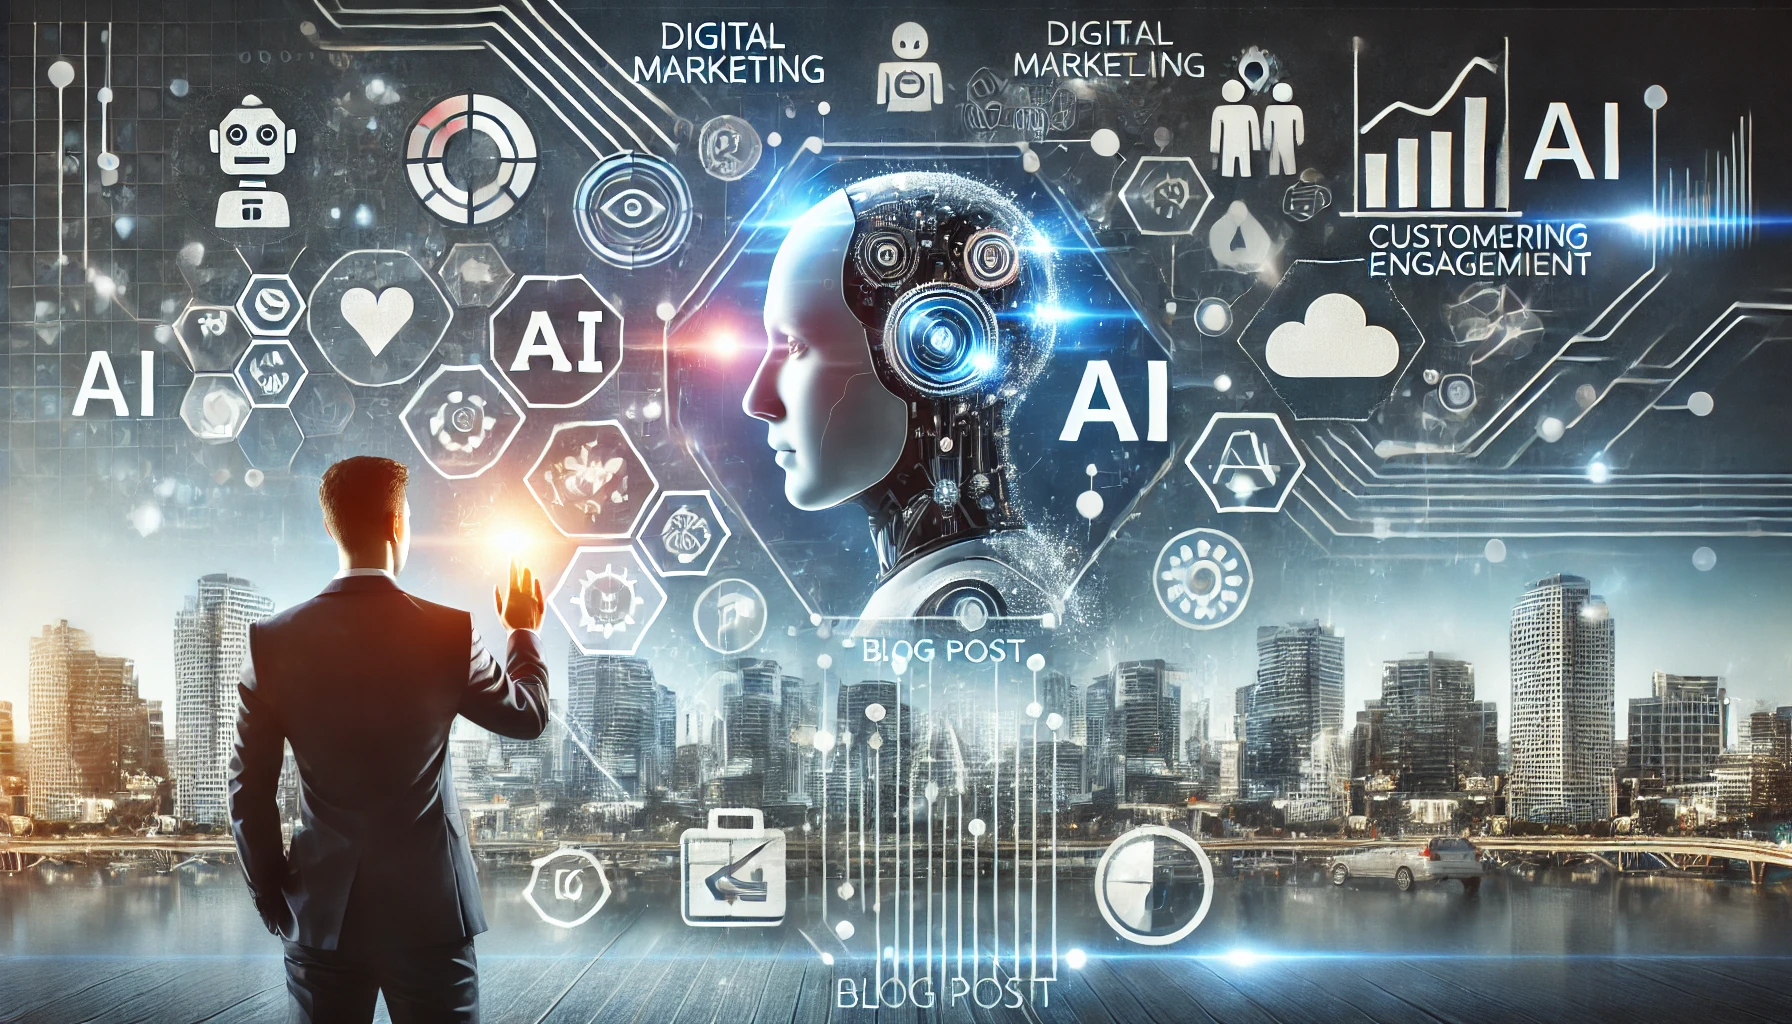 The image features digital marketing icons, AI symbols, and a business professional interacting with AI technology on a screen. Visuals representing data analytics, customer engagement, and advertising are included. The background blends modern and futuristic aesthetics with blue, silver, and white tones.